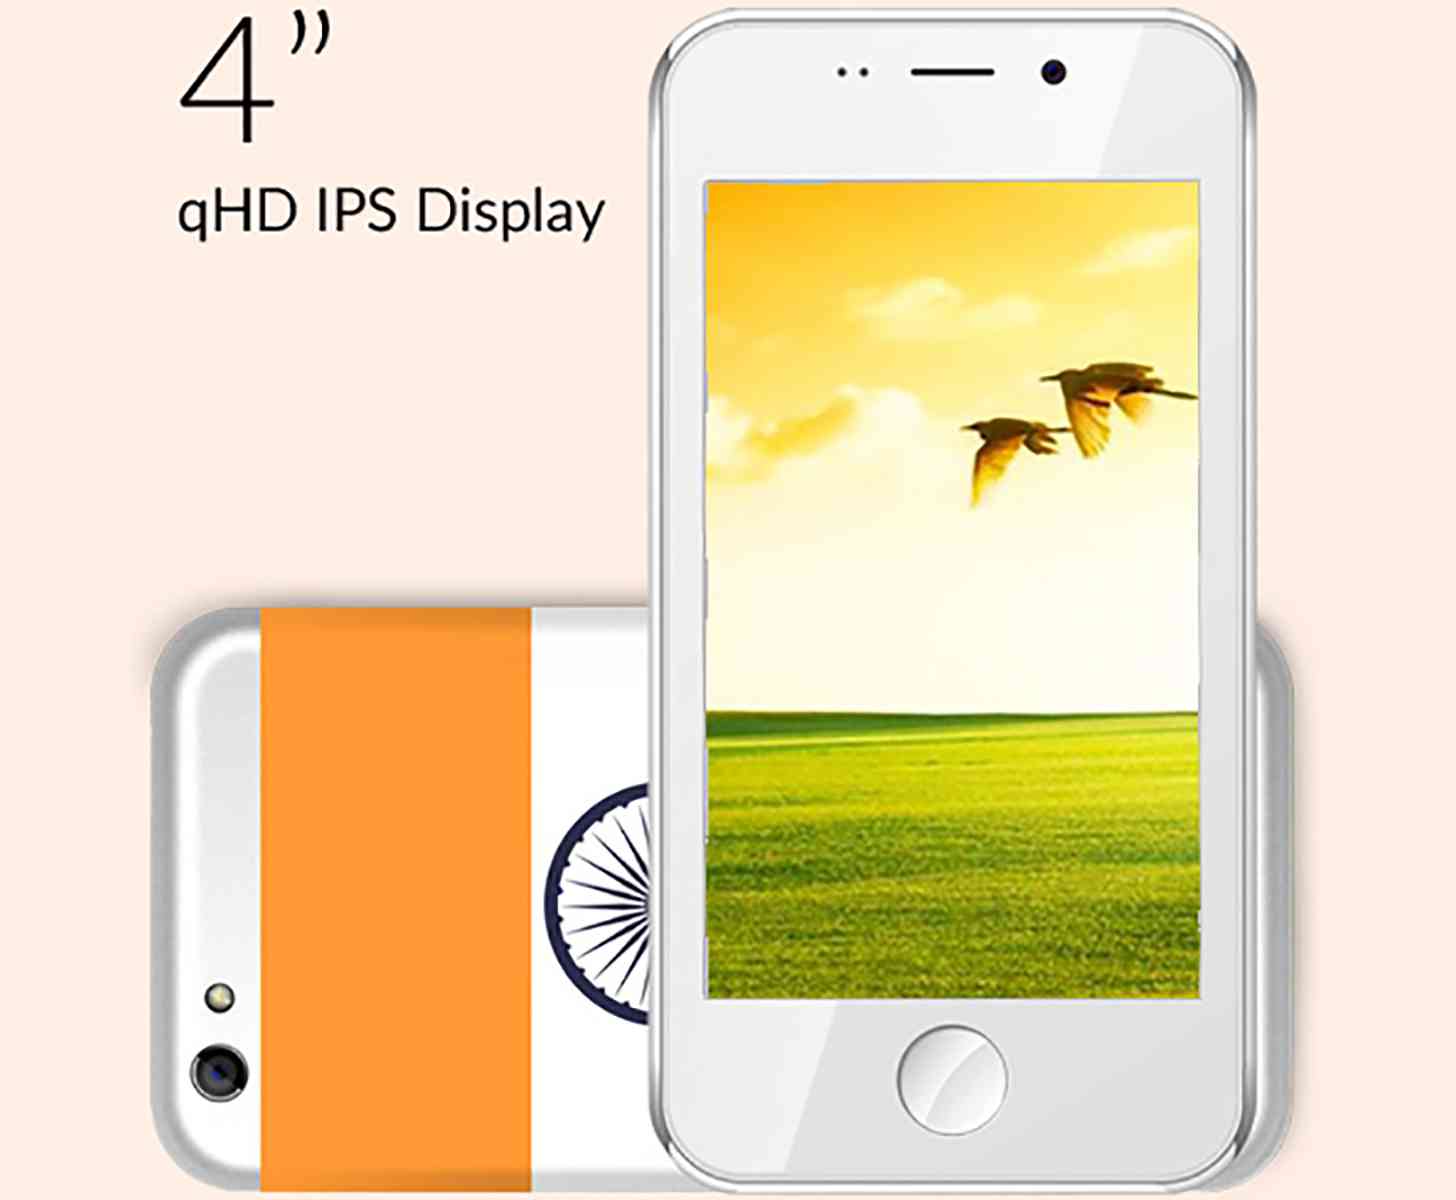 Freedom 251 Android phone India